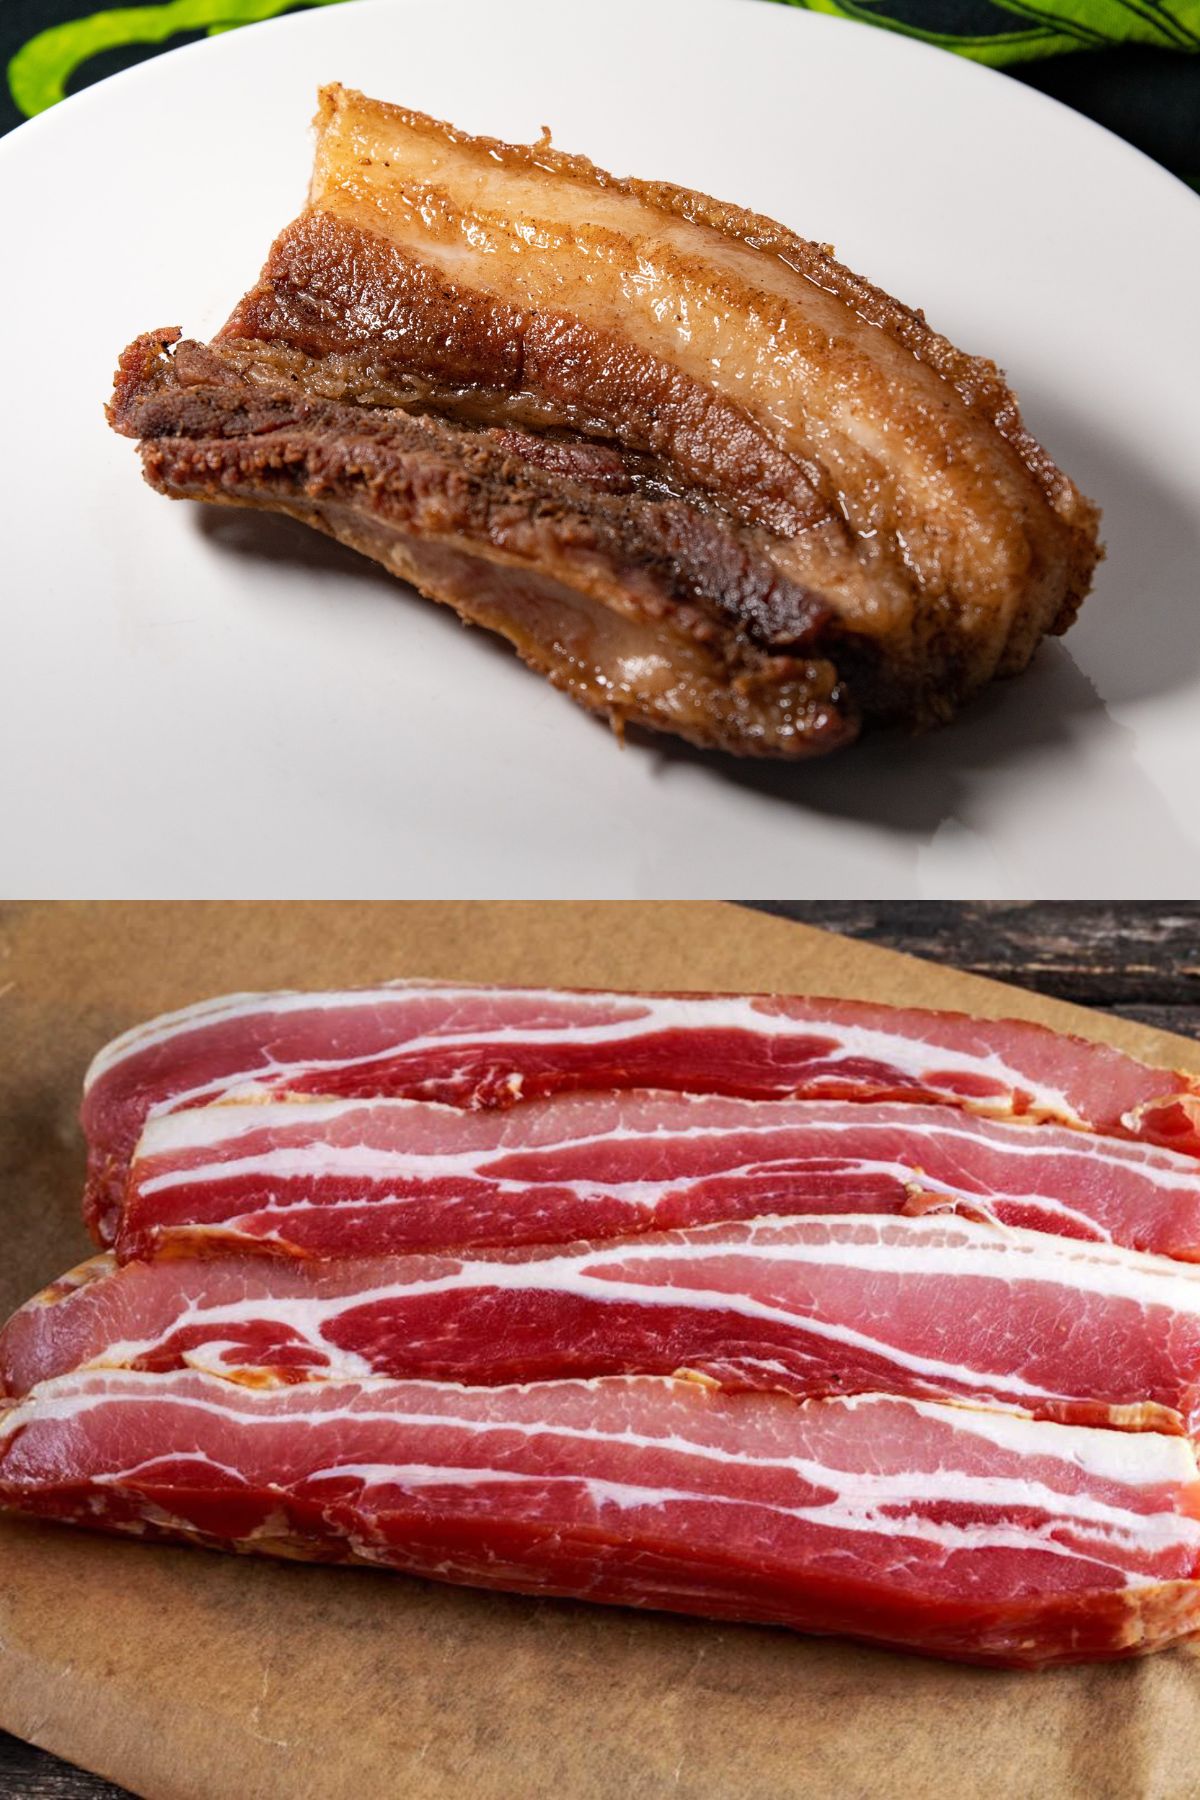 Cooked slice of pork belly and raw slices of bacon.